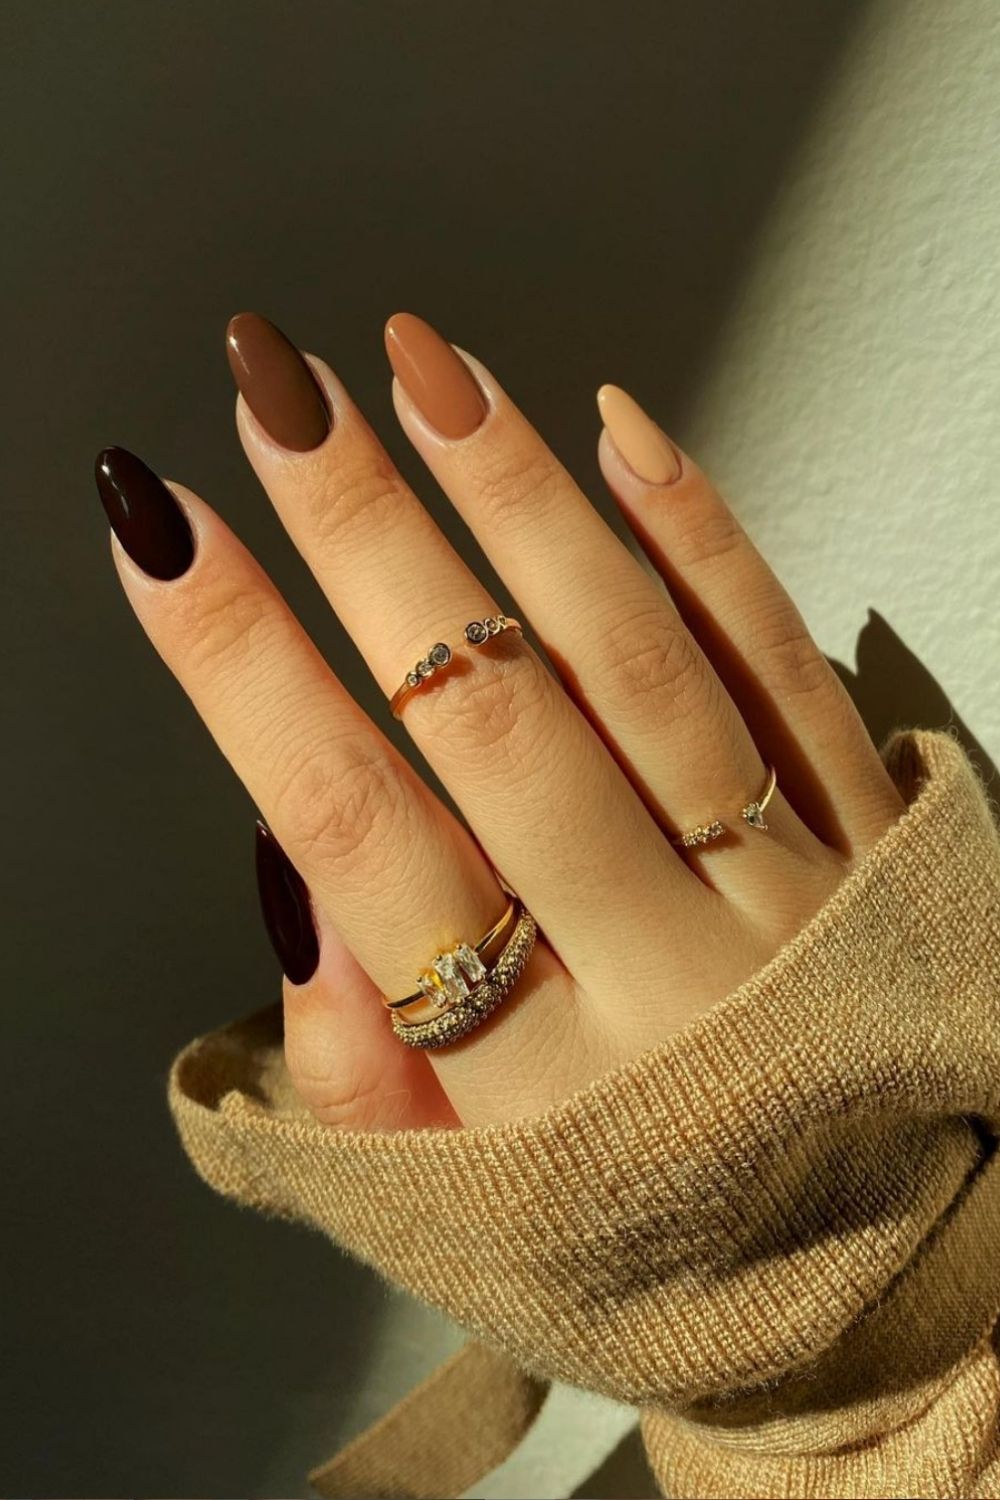 58 Pretty & Trendy Fall nail colors 2021 you'll love this Autumn